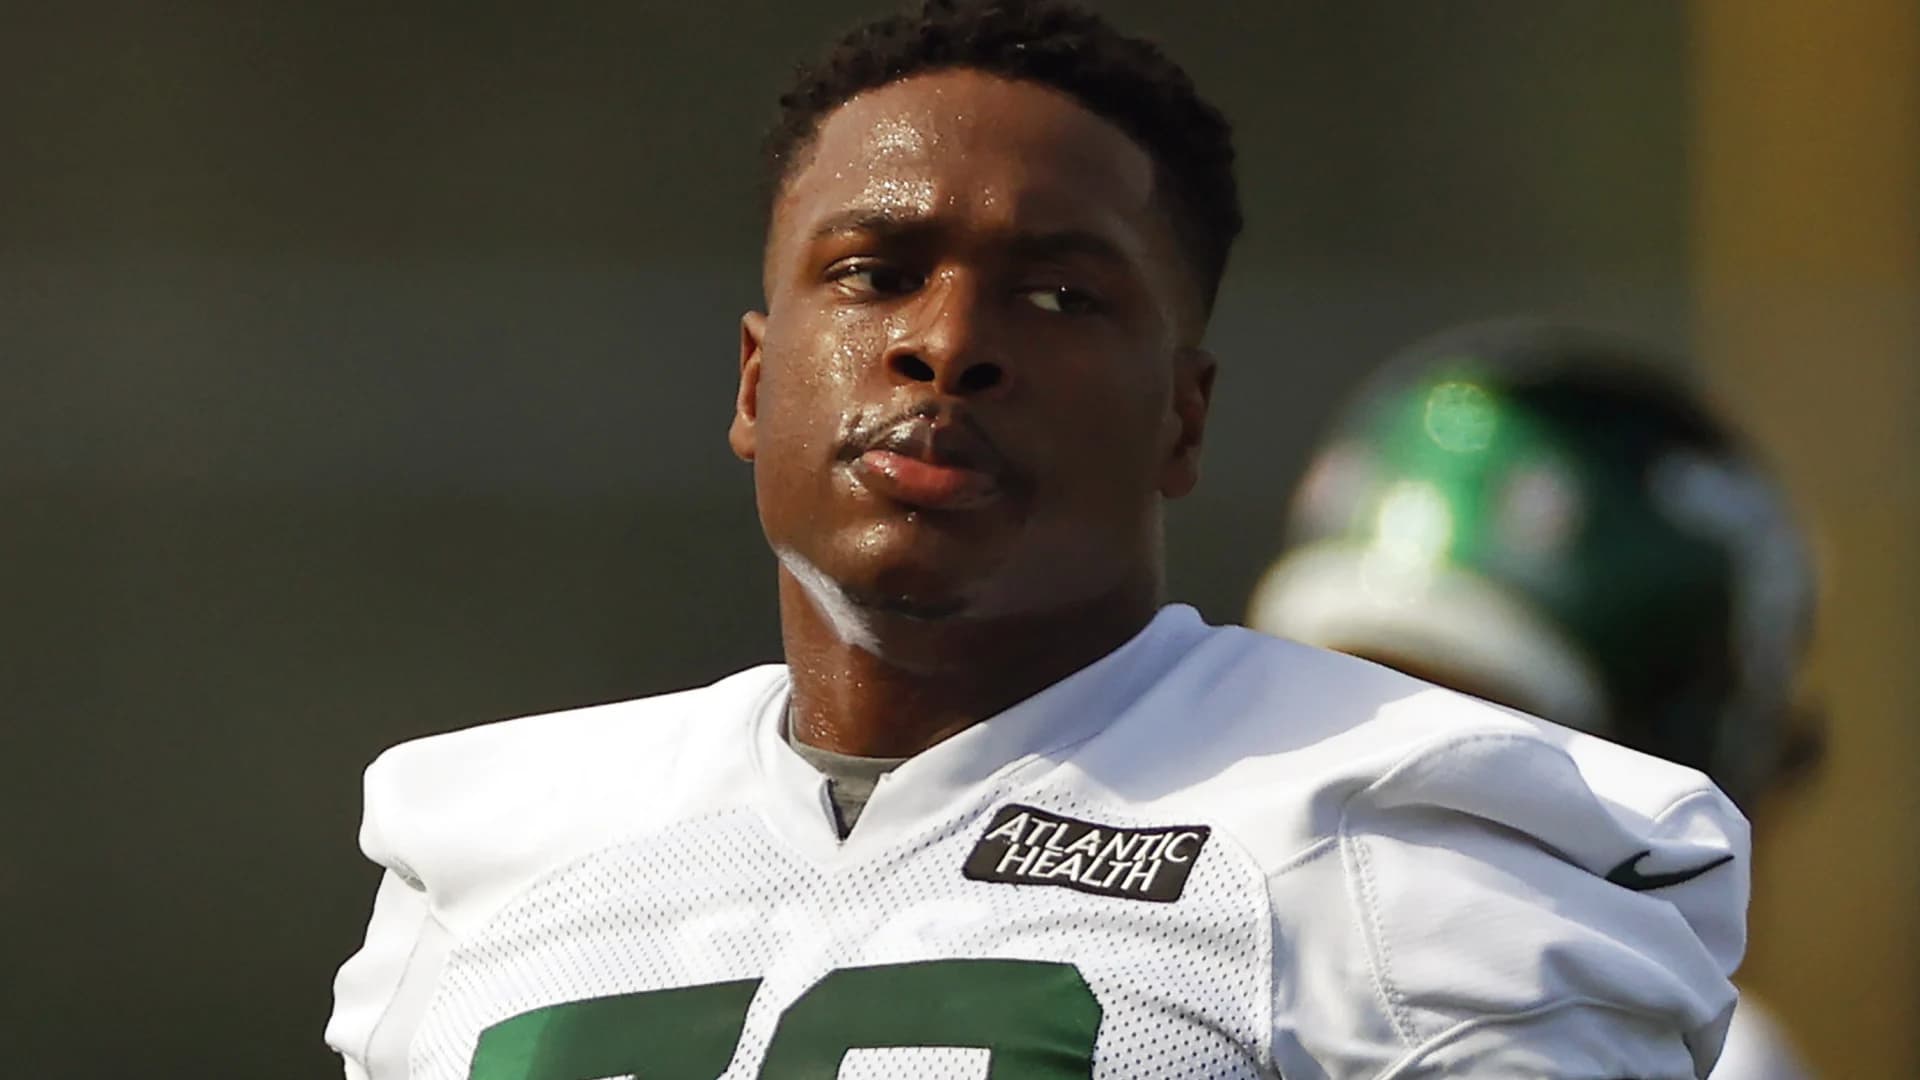 Jets lineman Cameron Clark has bruised spinal cord, should fully recover